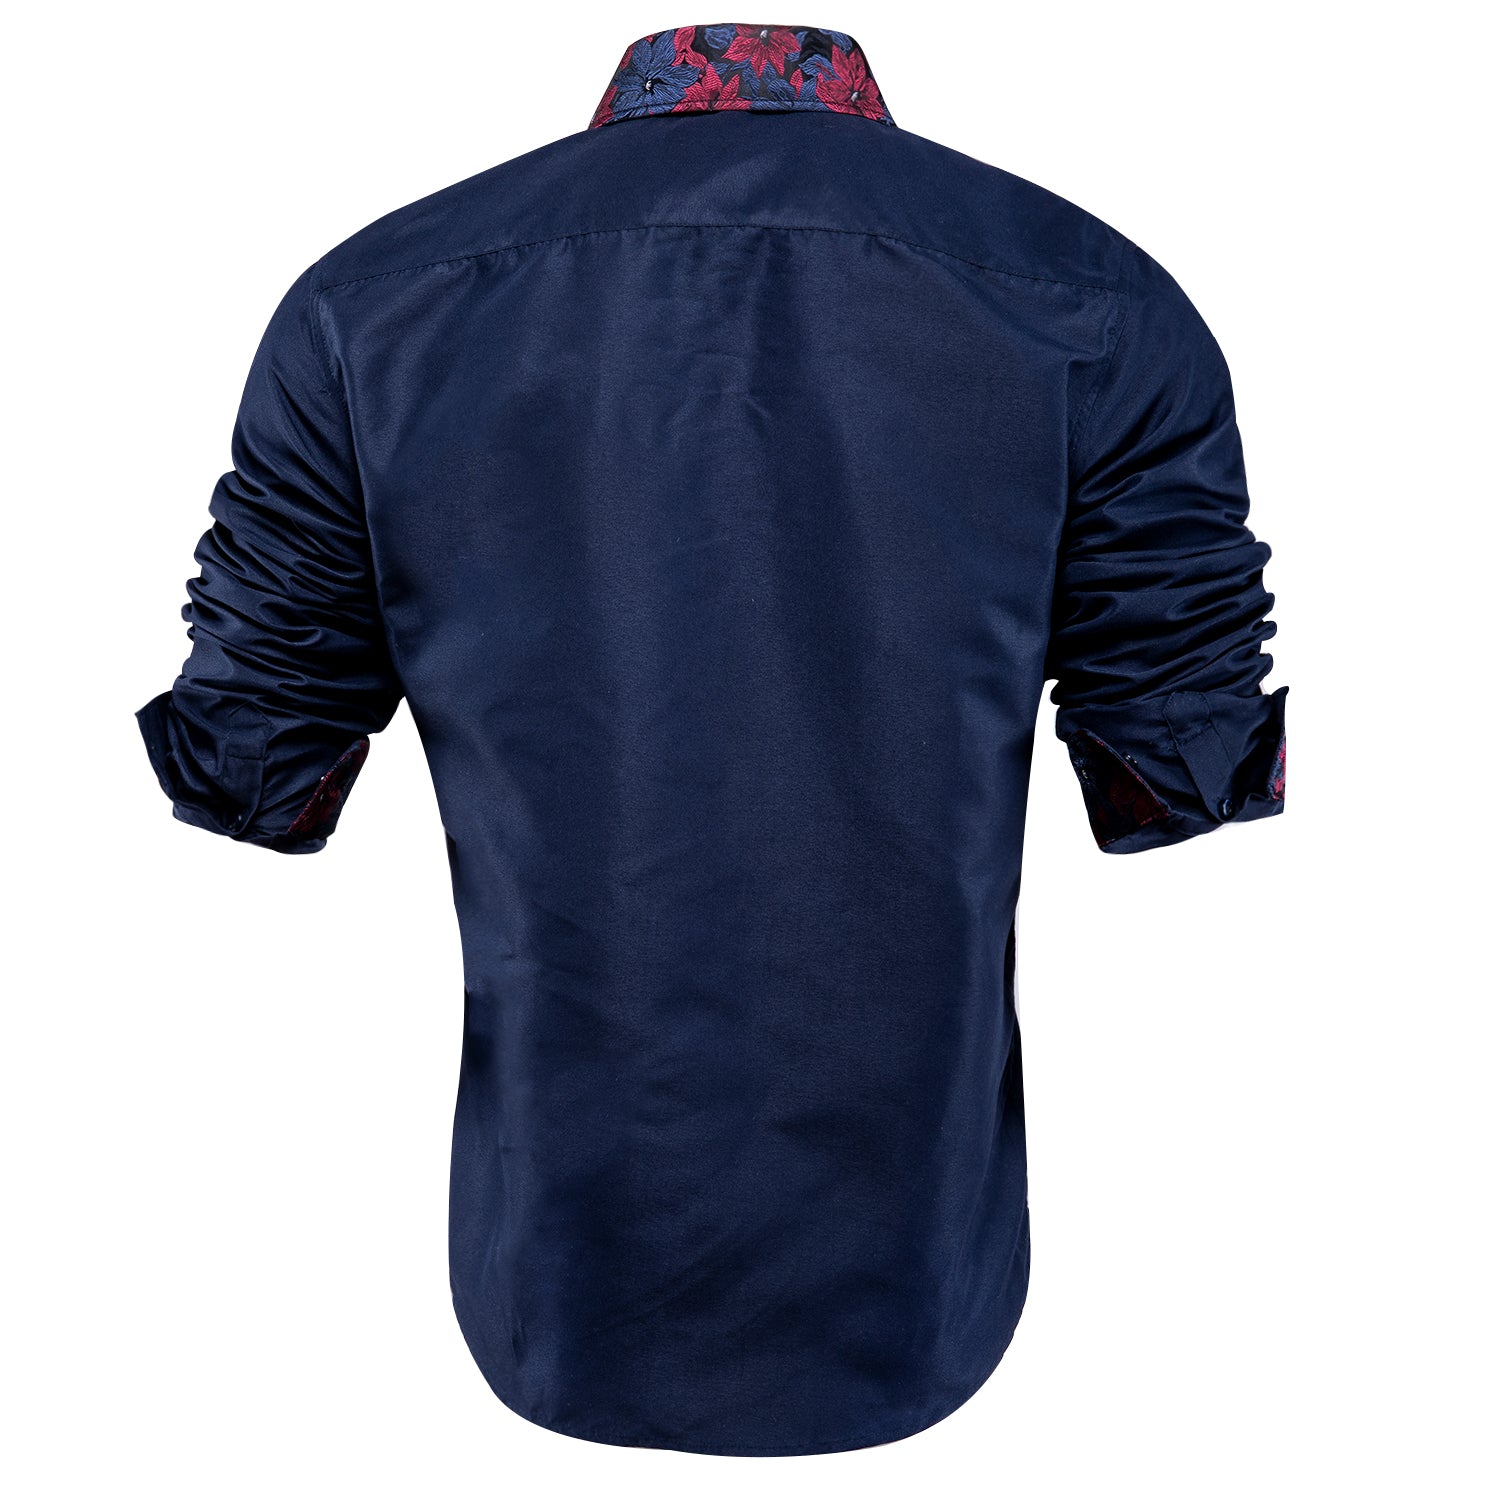 Clearance Sale Deep Blue Red Stitching Shirt